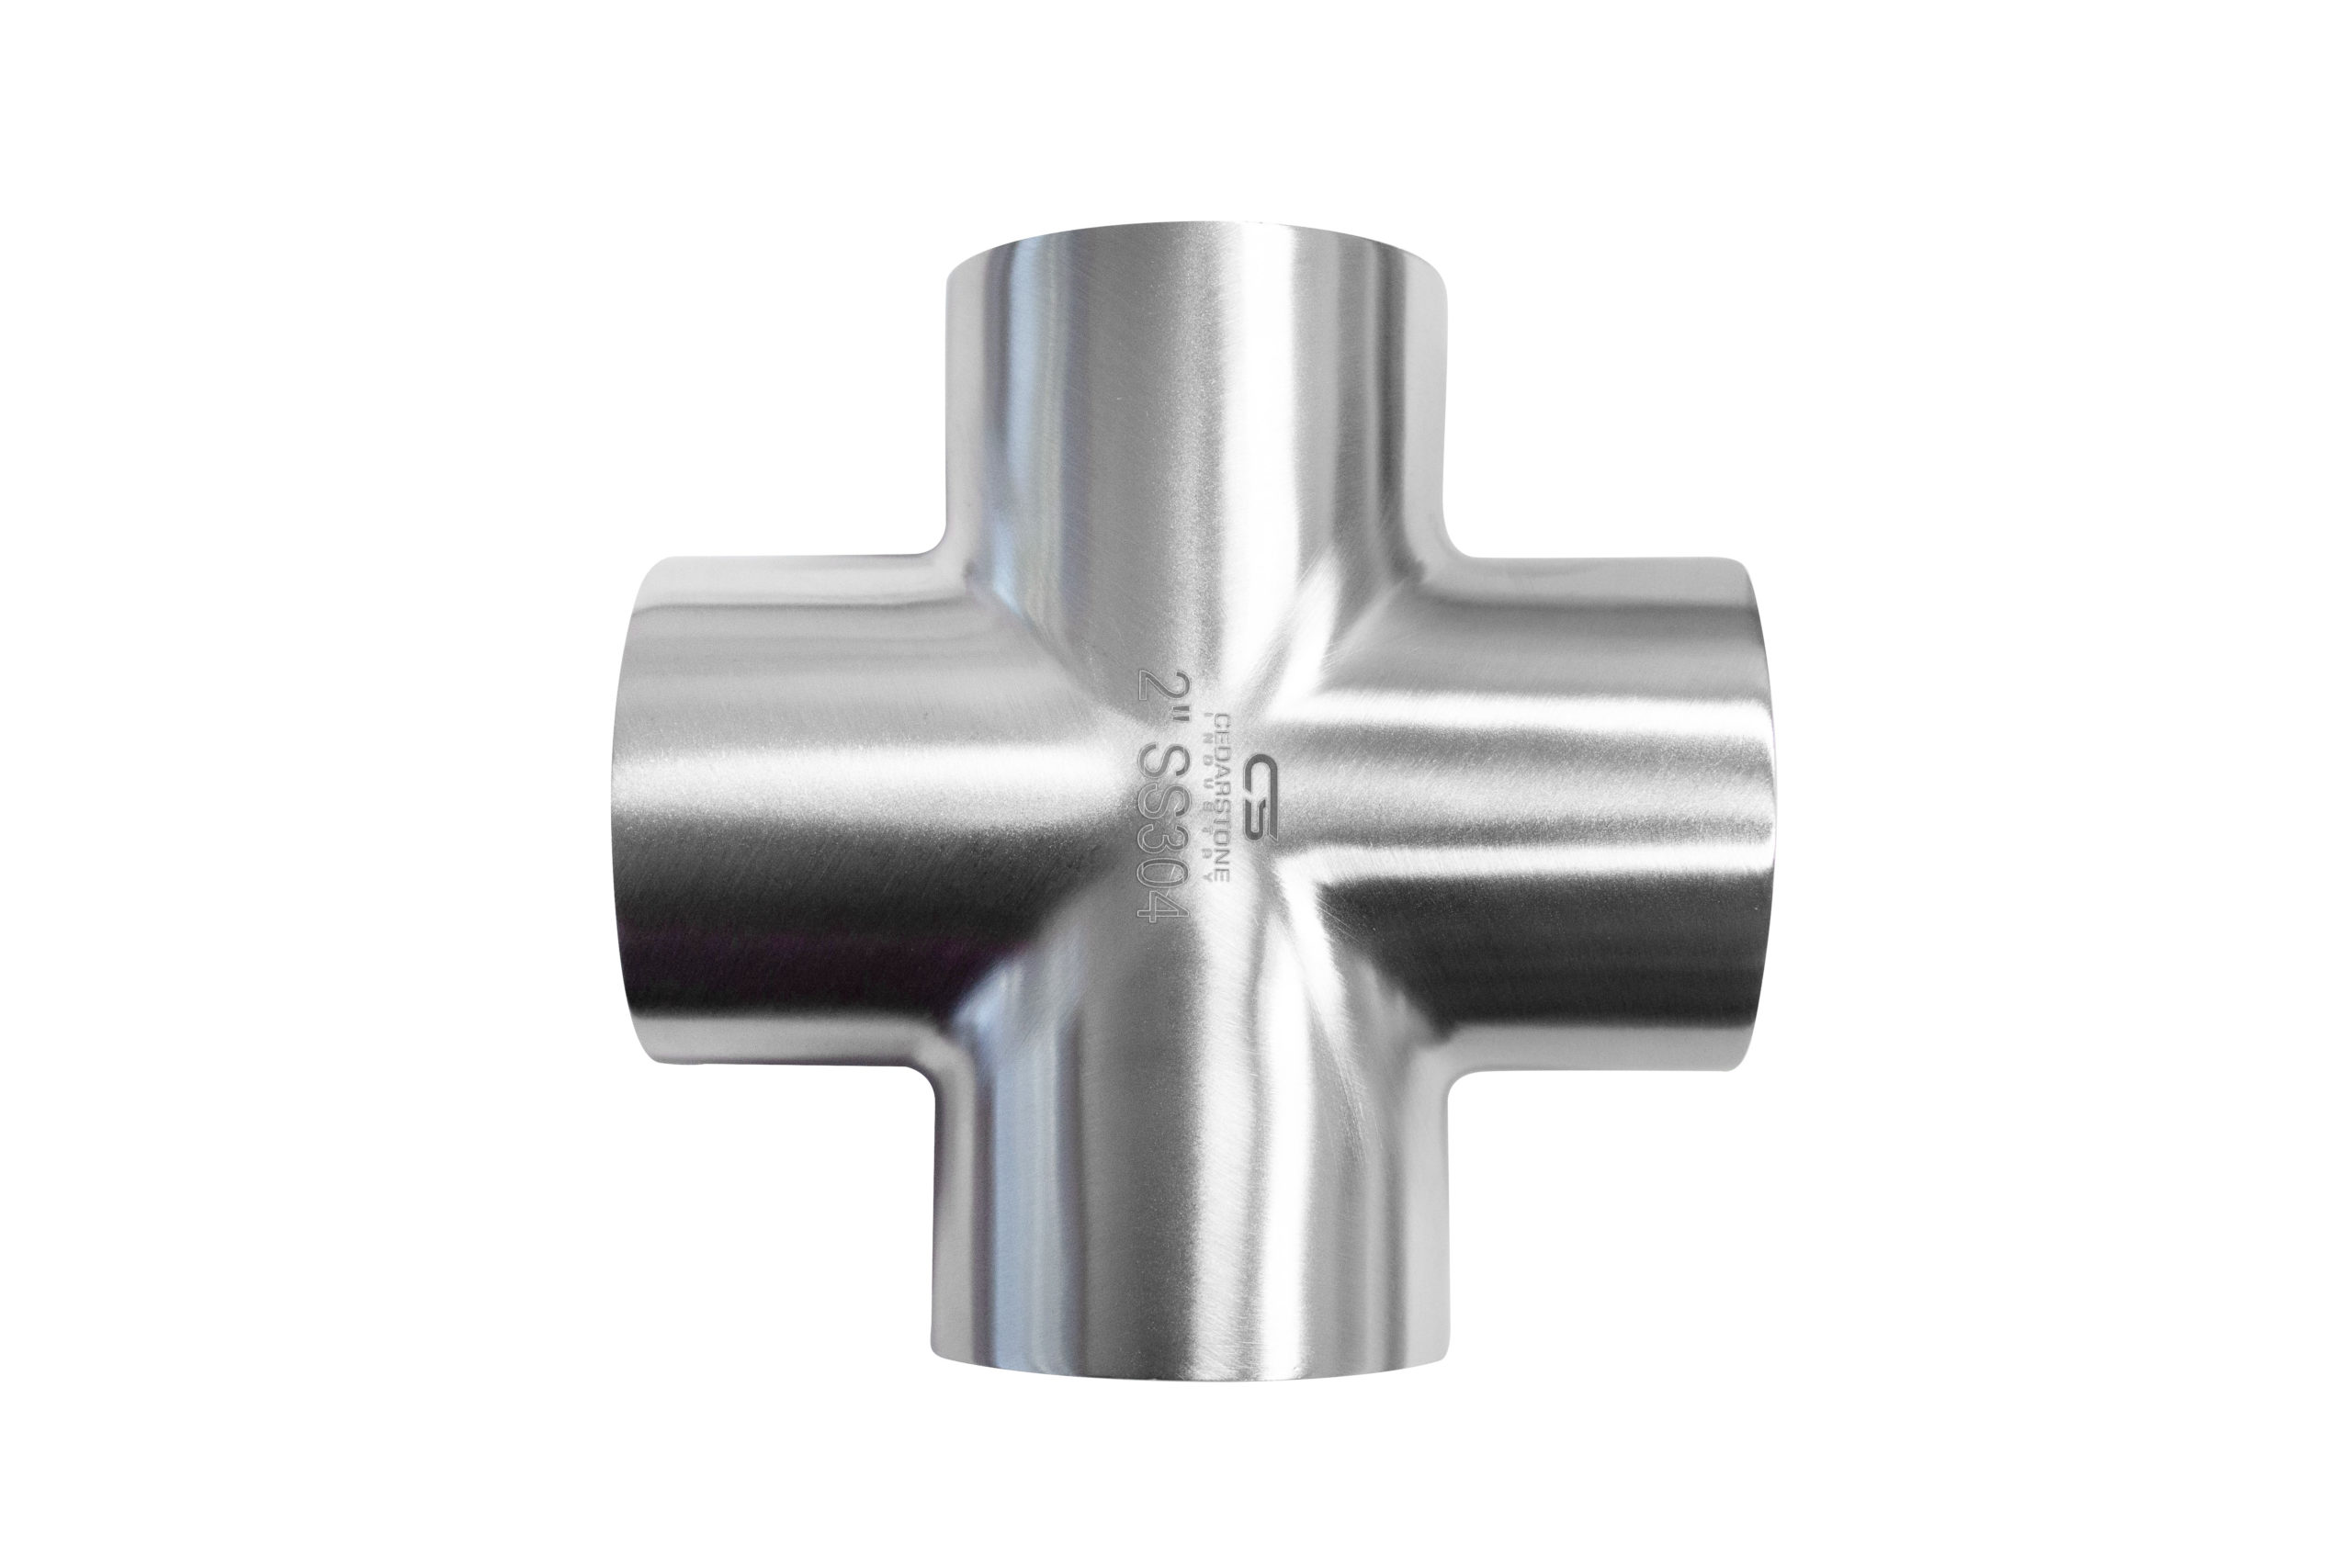 4 Way Stainless Steel Cross Angles w/ 1" Sanitary Fittings 